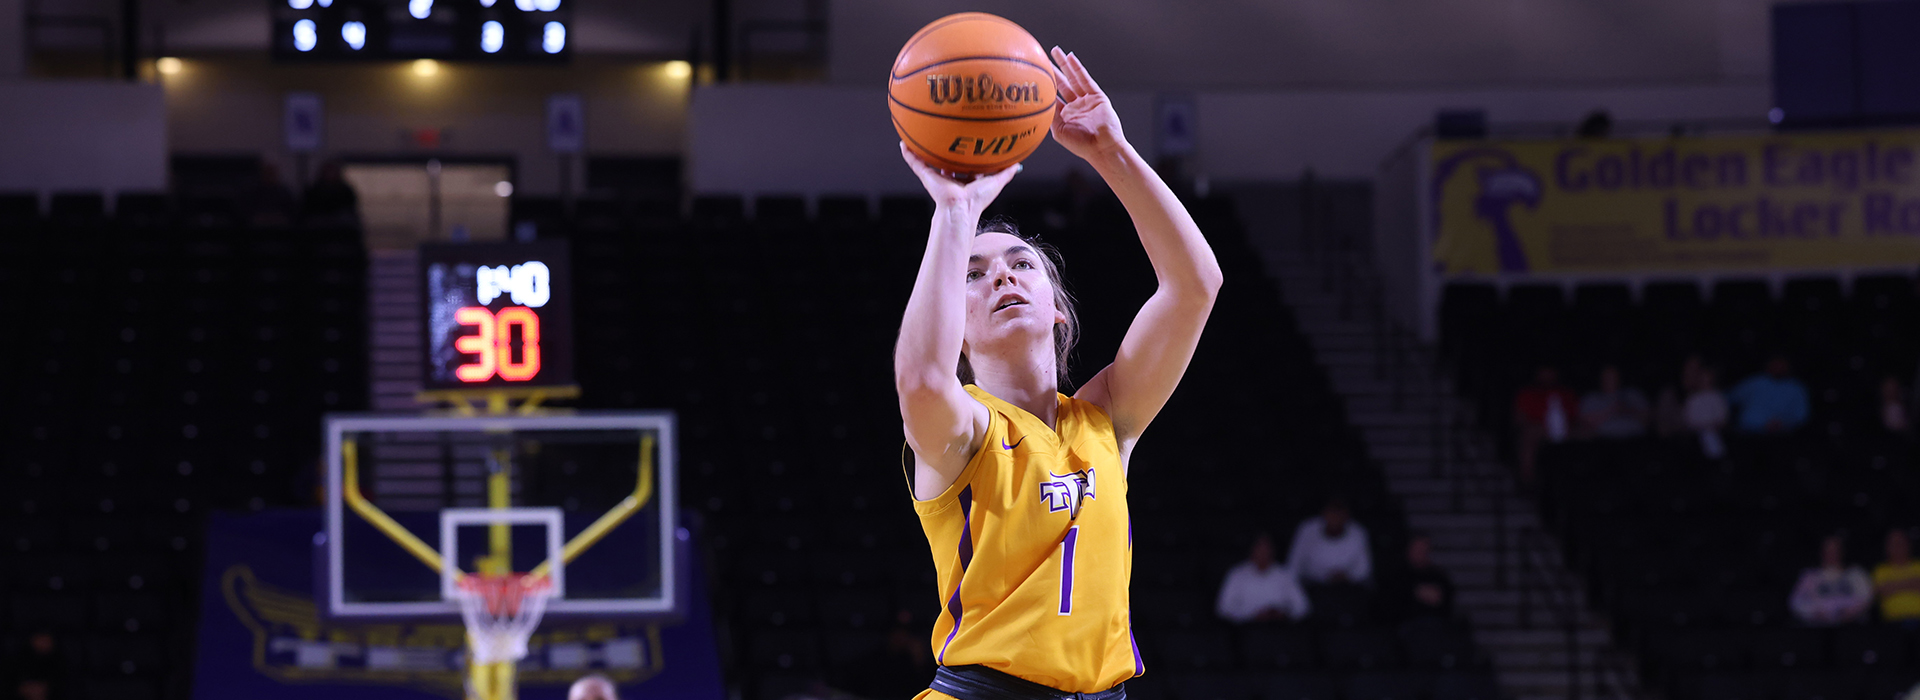 Tech women looking to shape position in OVC during Thursday visit from SIUE